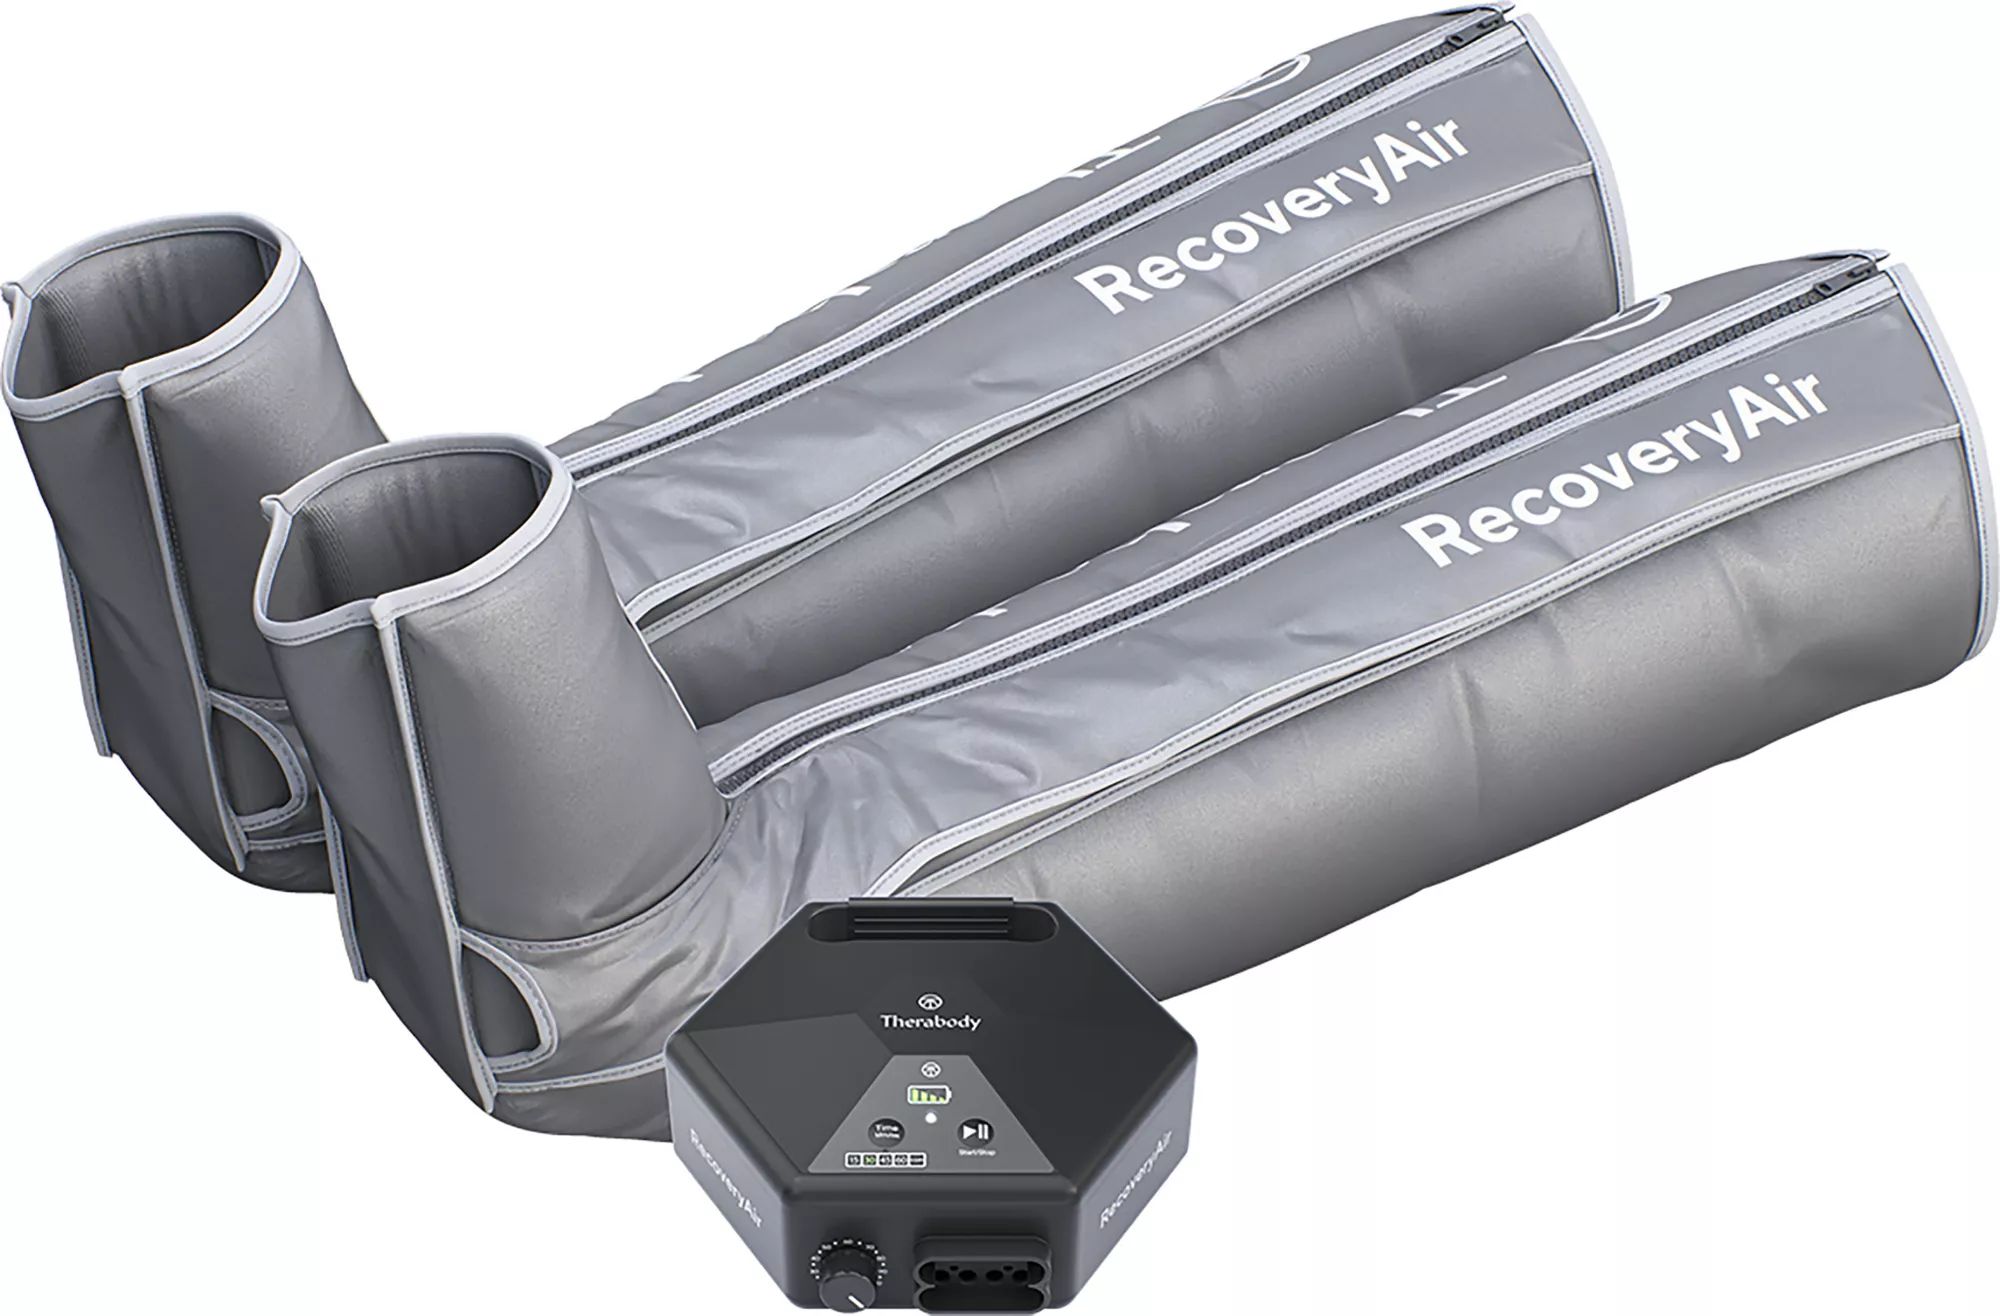 DISCTherabody - RecoveryAir Compression System - Large